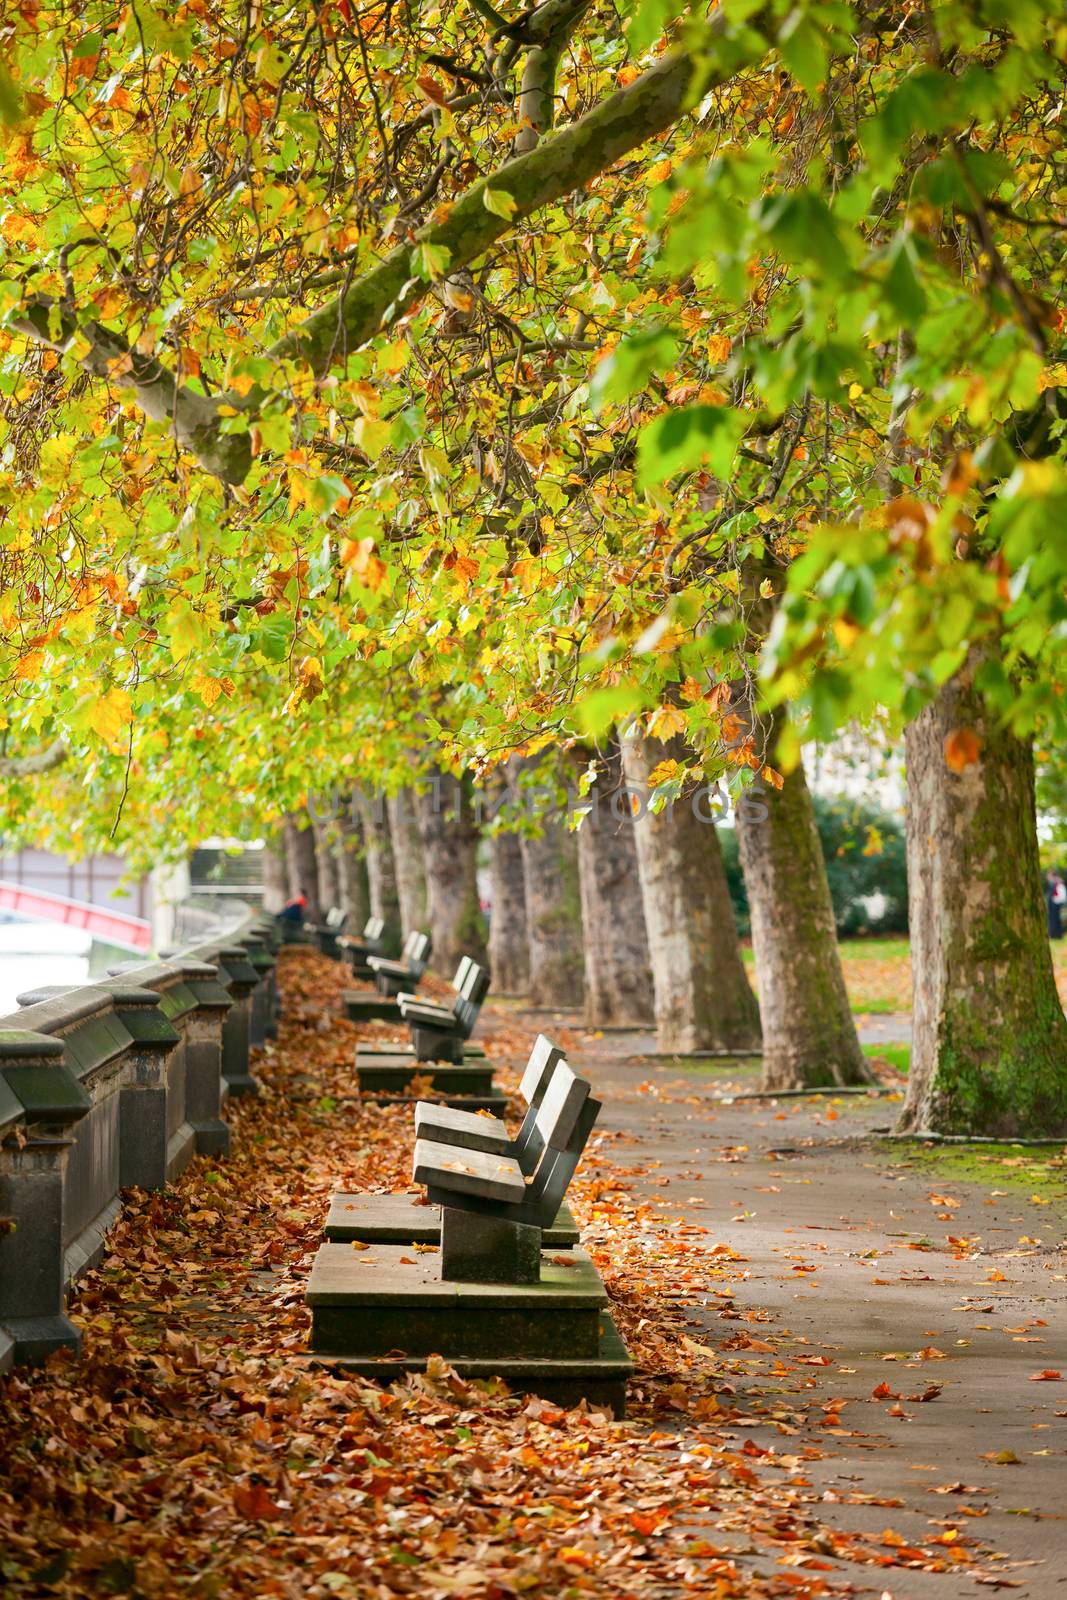 Benches on the Thames in Victoria Tower Gardens park in London